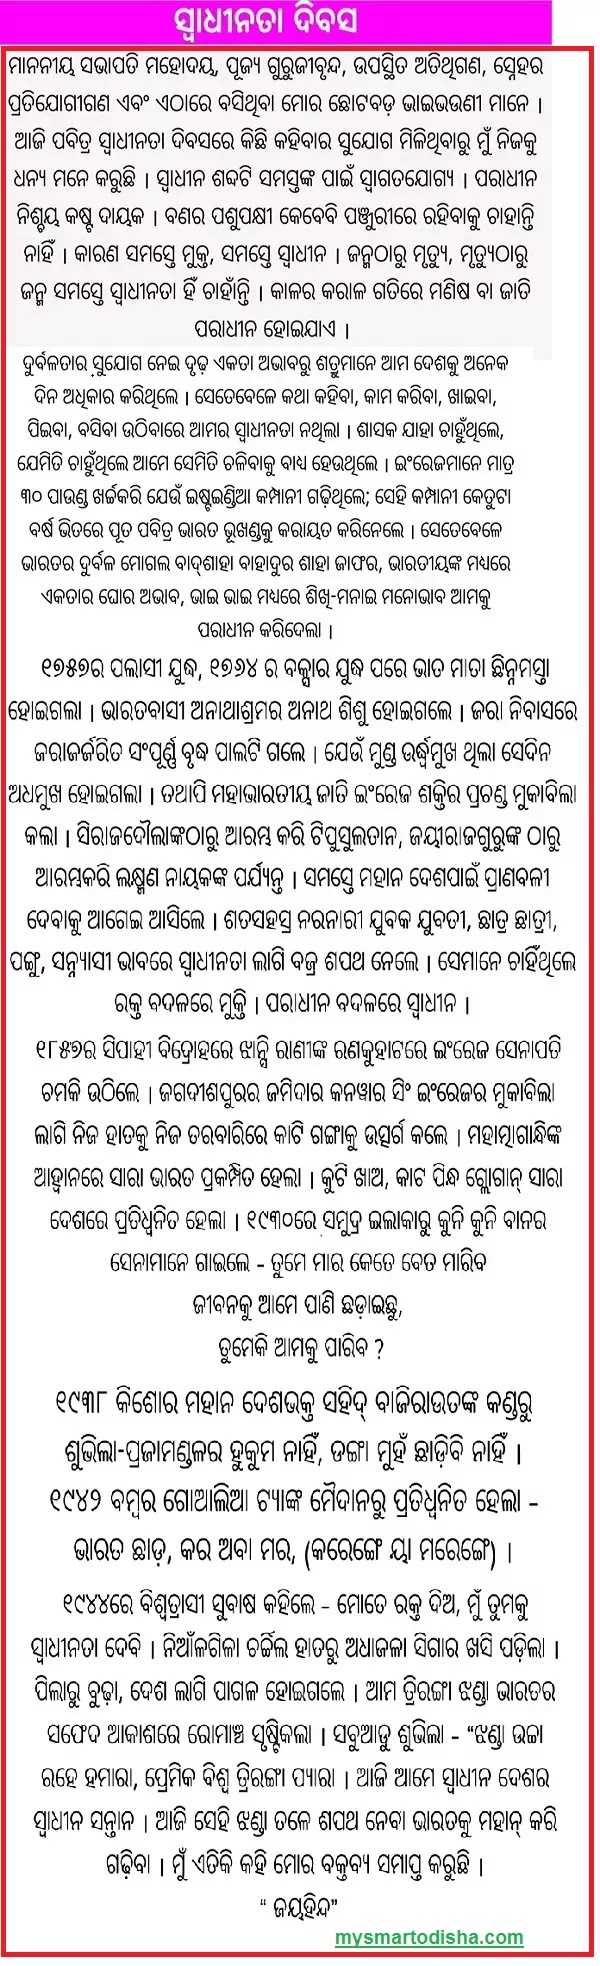 Independence Day Essay in Odia